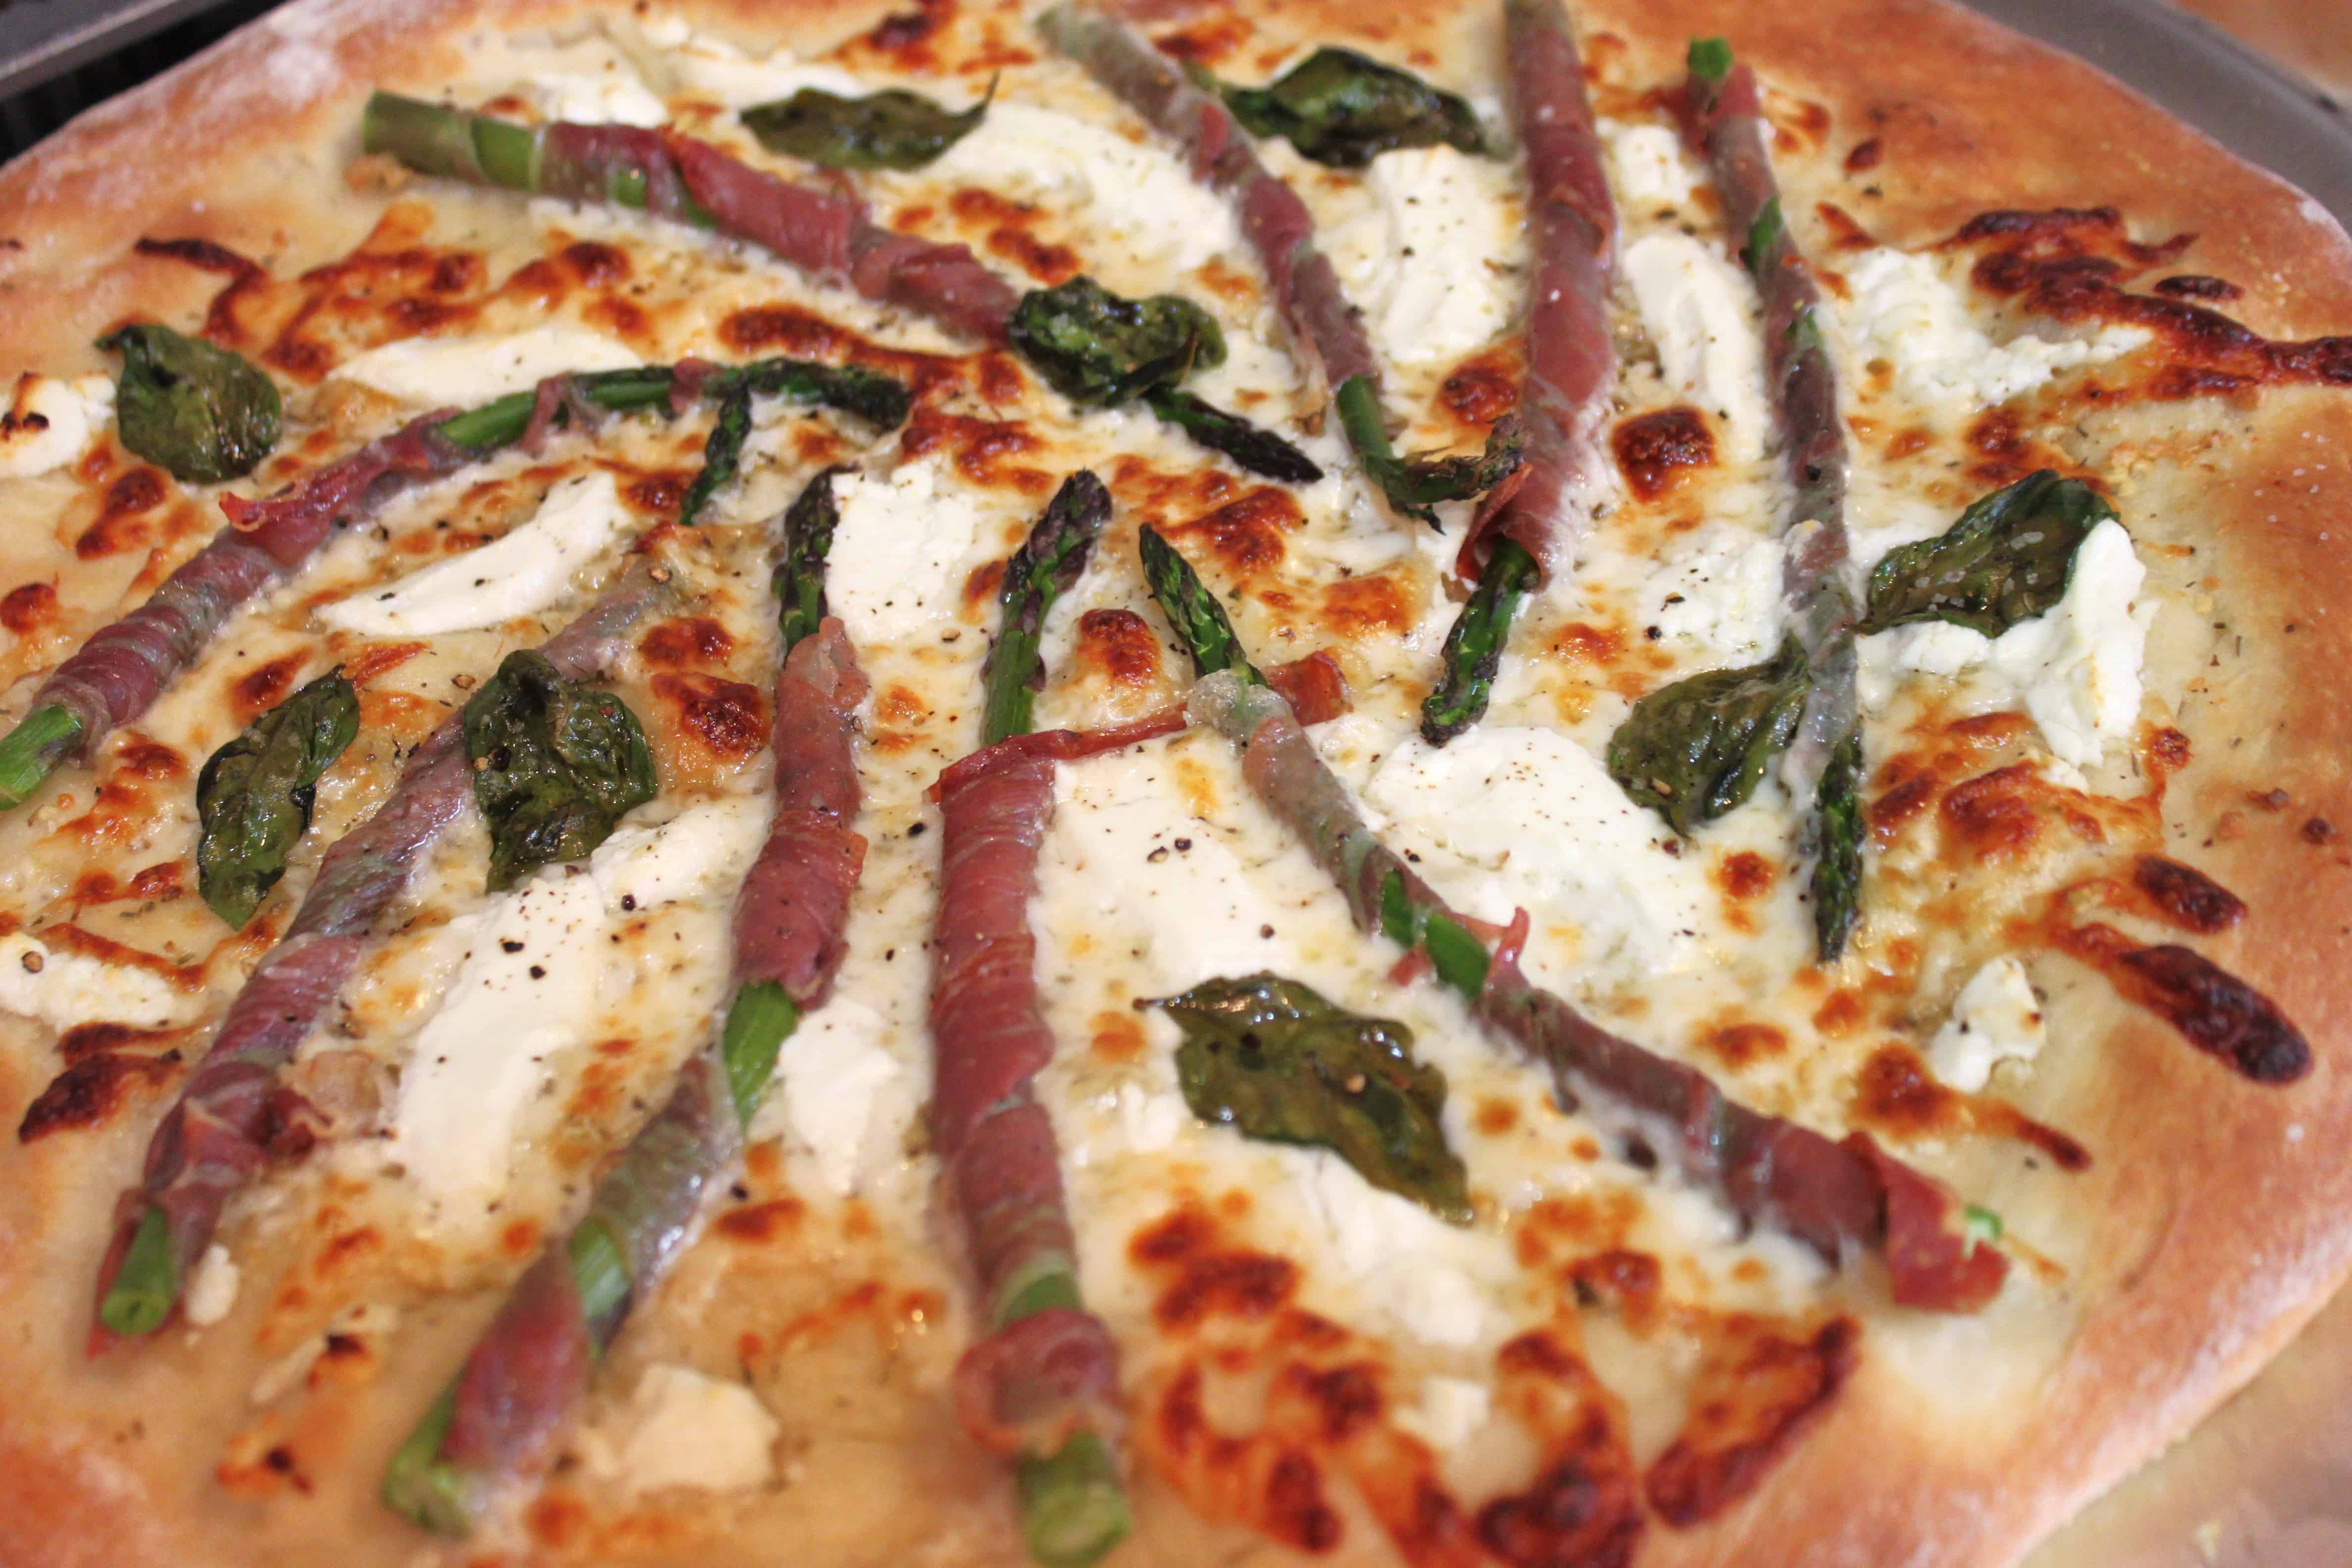 Prosciutto Wrapped Asparagus with Goat Cheese Pizza